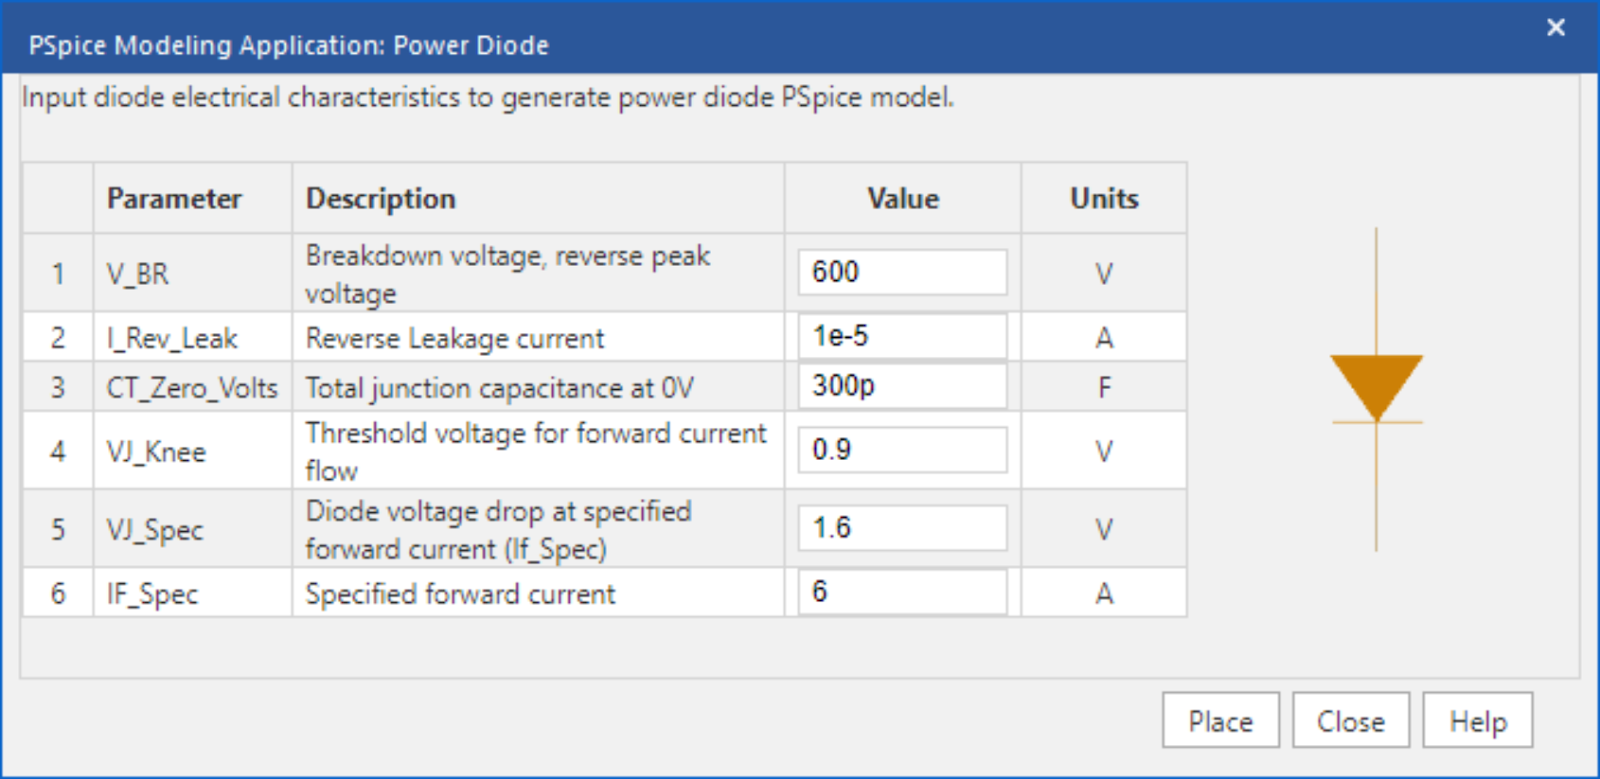 Create a power diode SPICE model with the PSpice Modeling Application